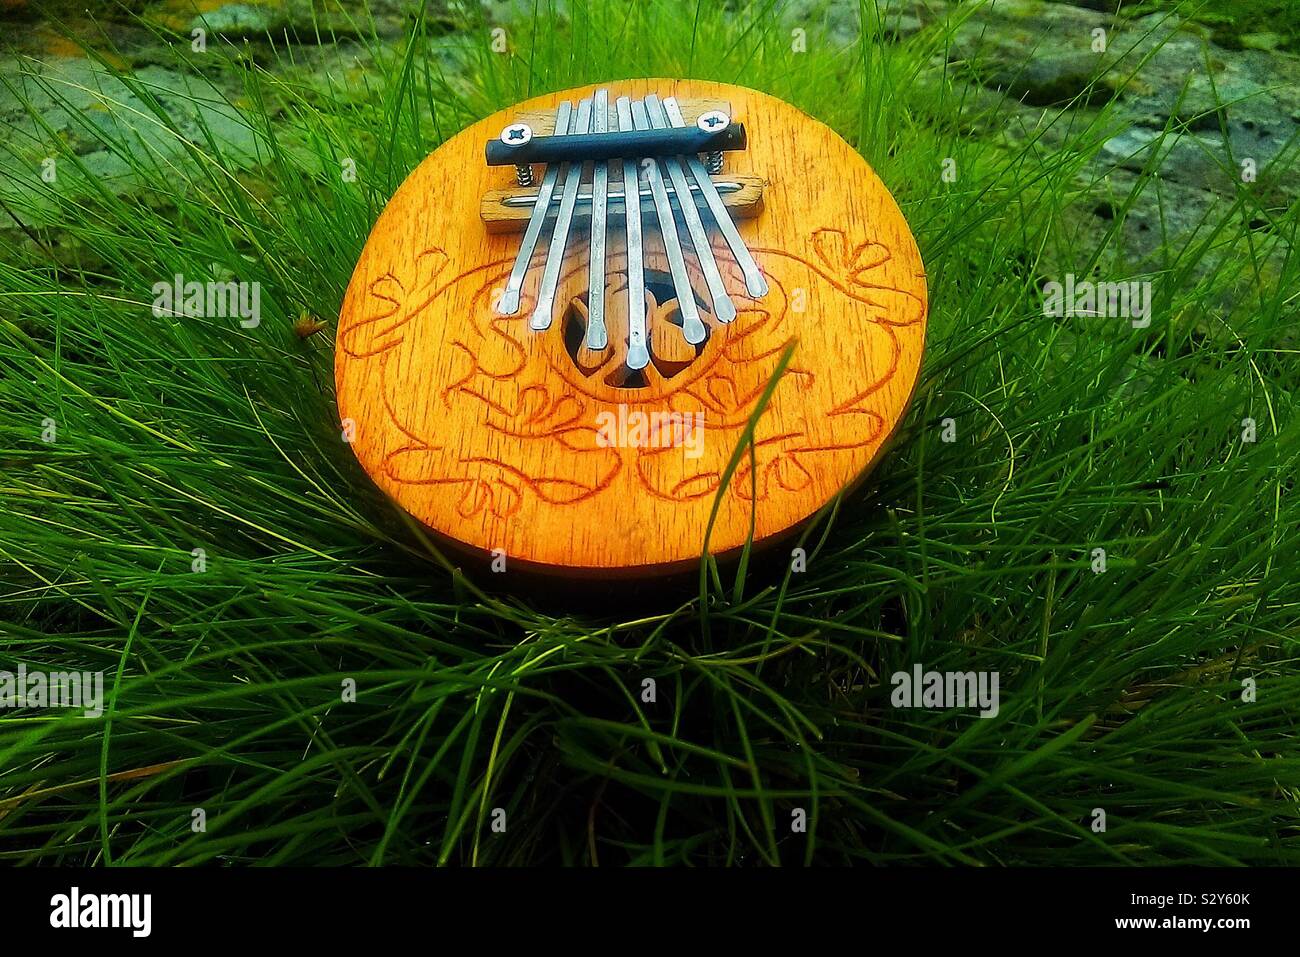 The tunes produced by this  wooden belly is quite something. Stock Photo